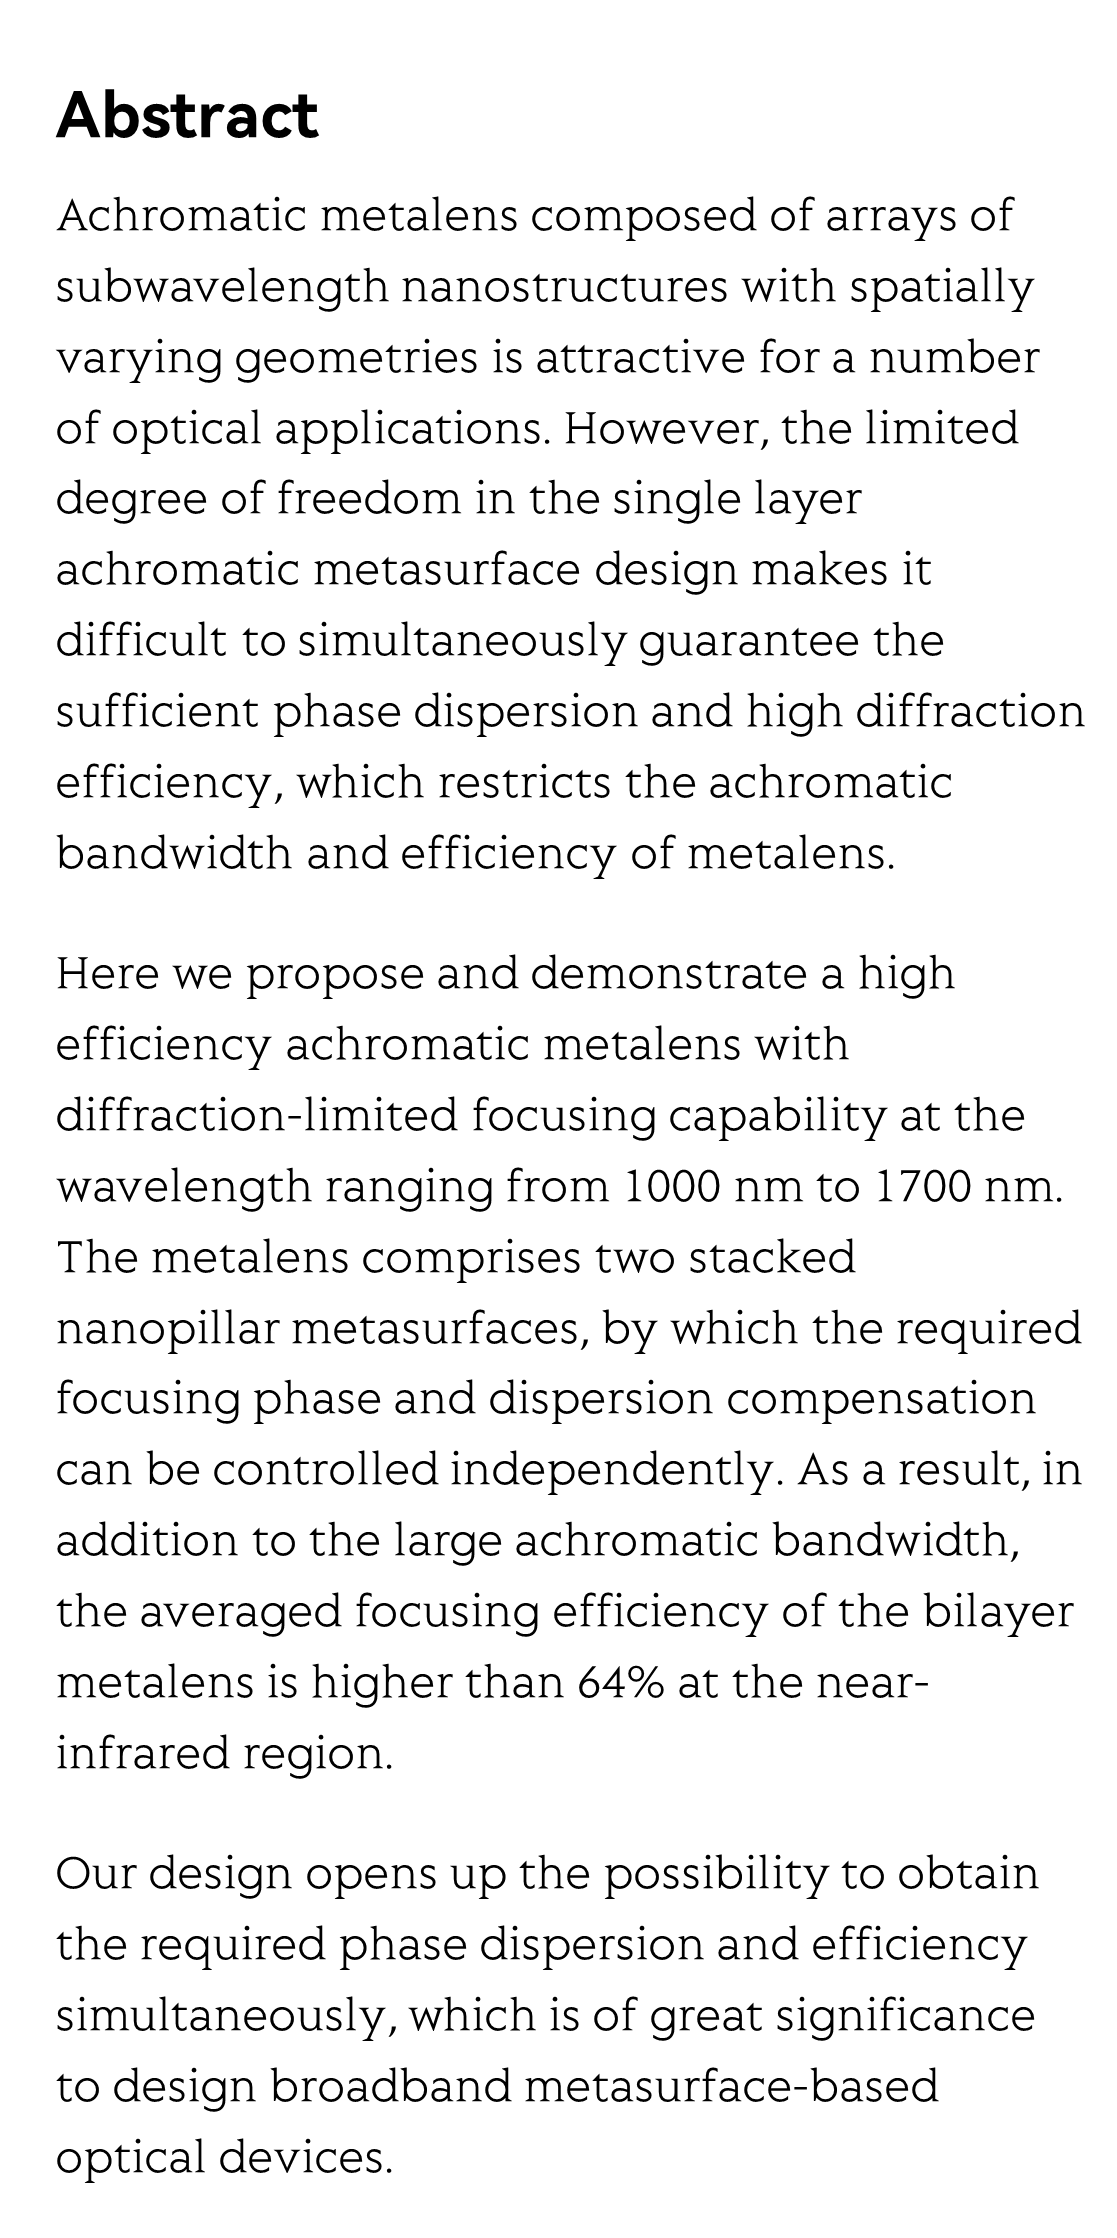 Design of high efficiency achromatic metalens with large operation bandwidth using bilayer architecture_2